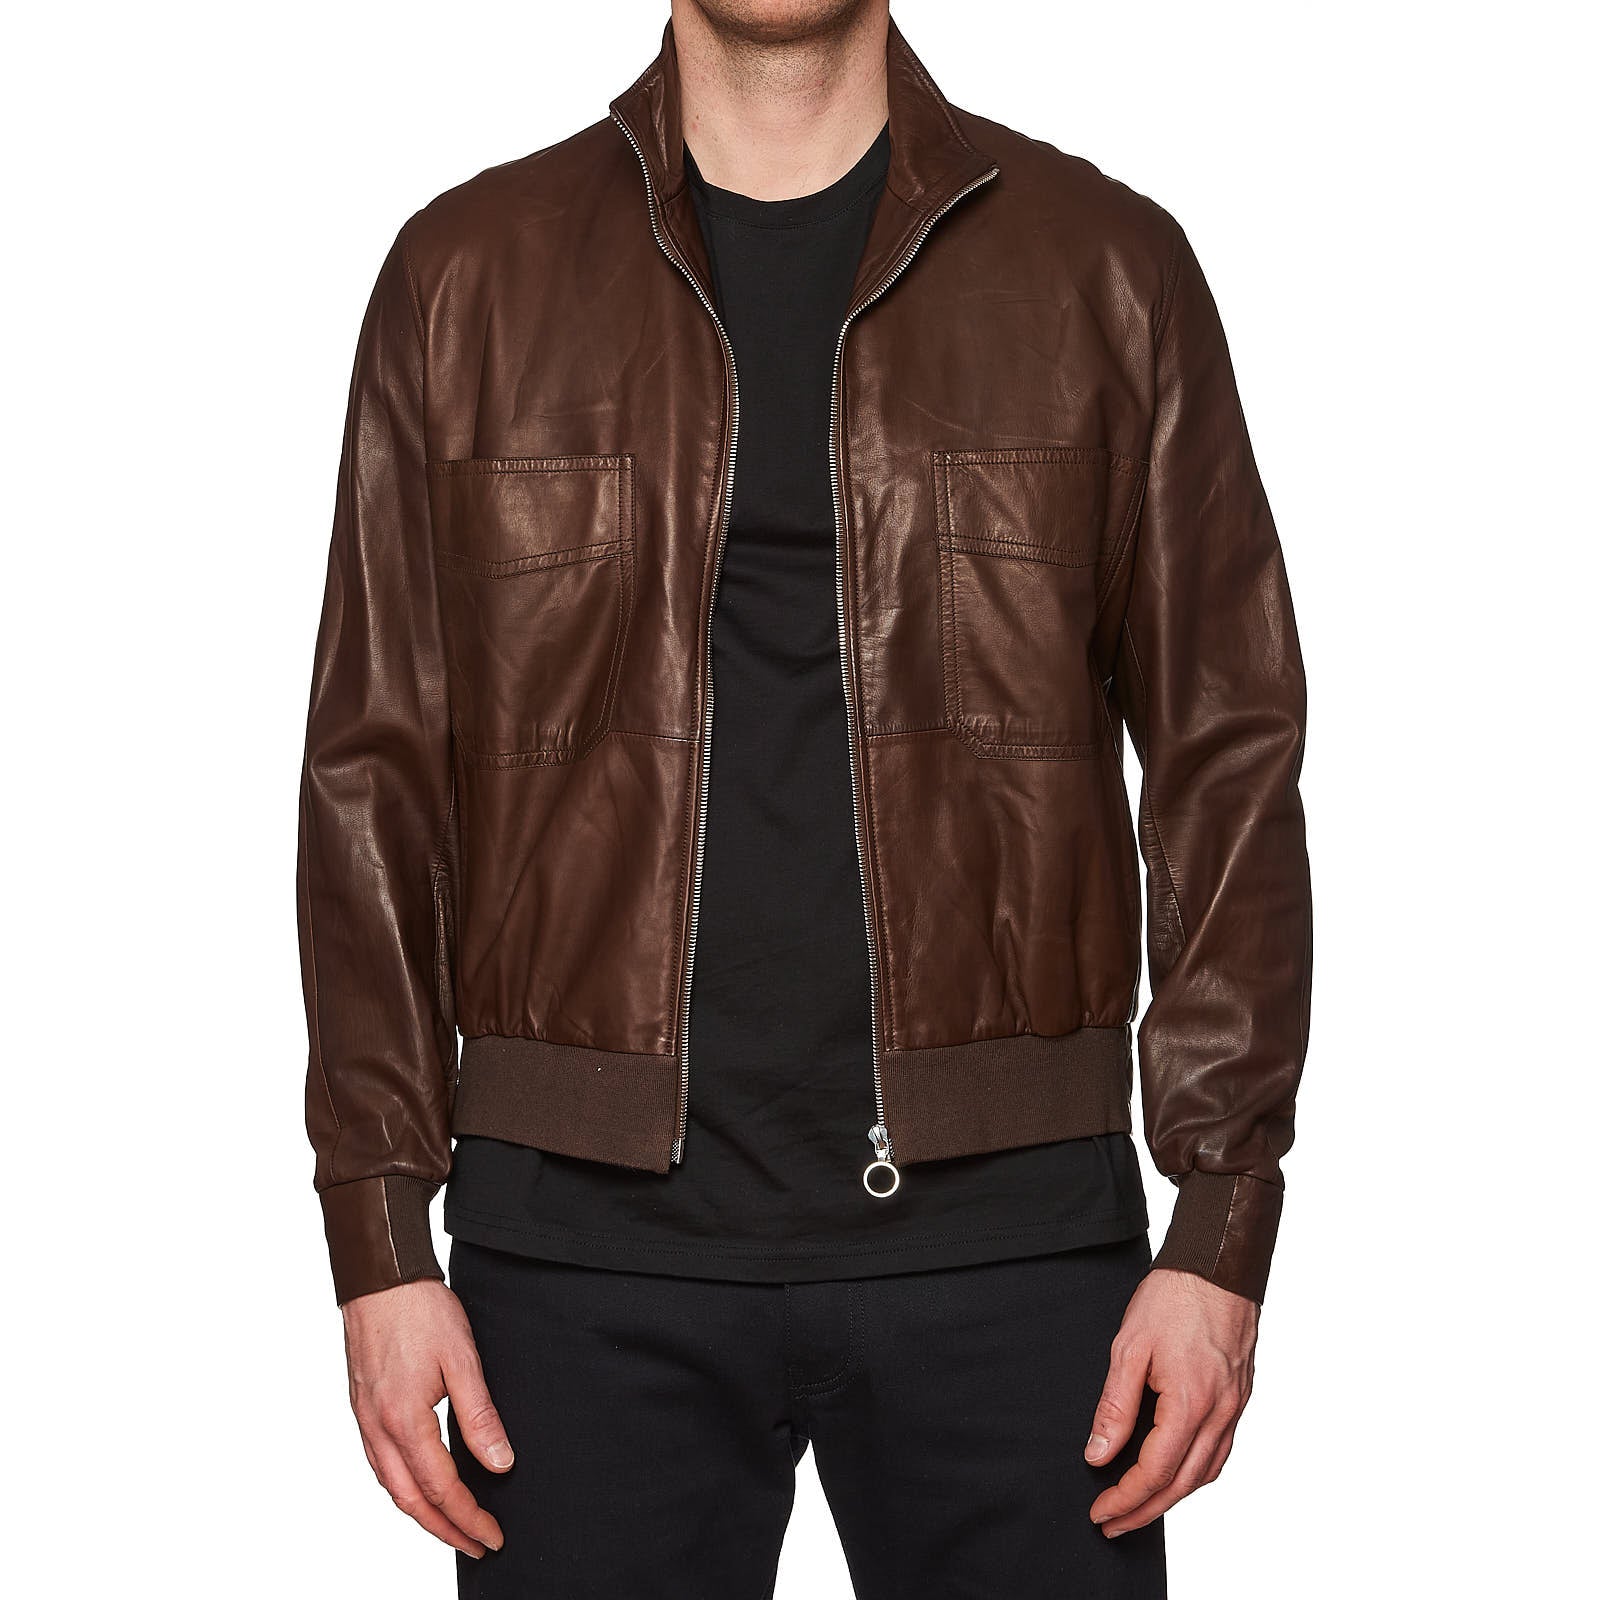 SERAPHIN Brown Lamb Leather Fully Lined Bomber Jacket FR 50 NEW US M SERAPHIN